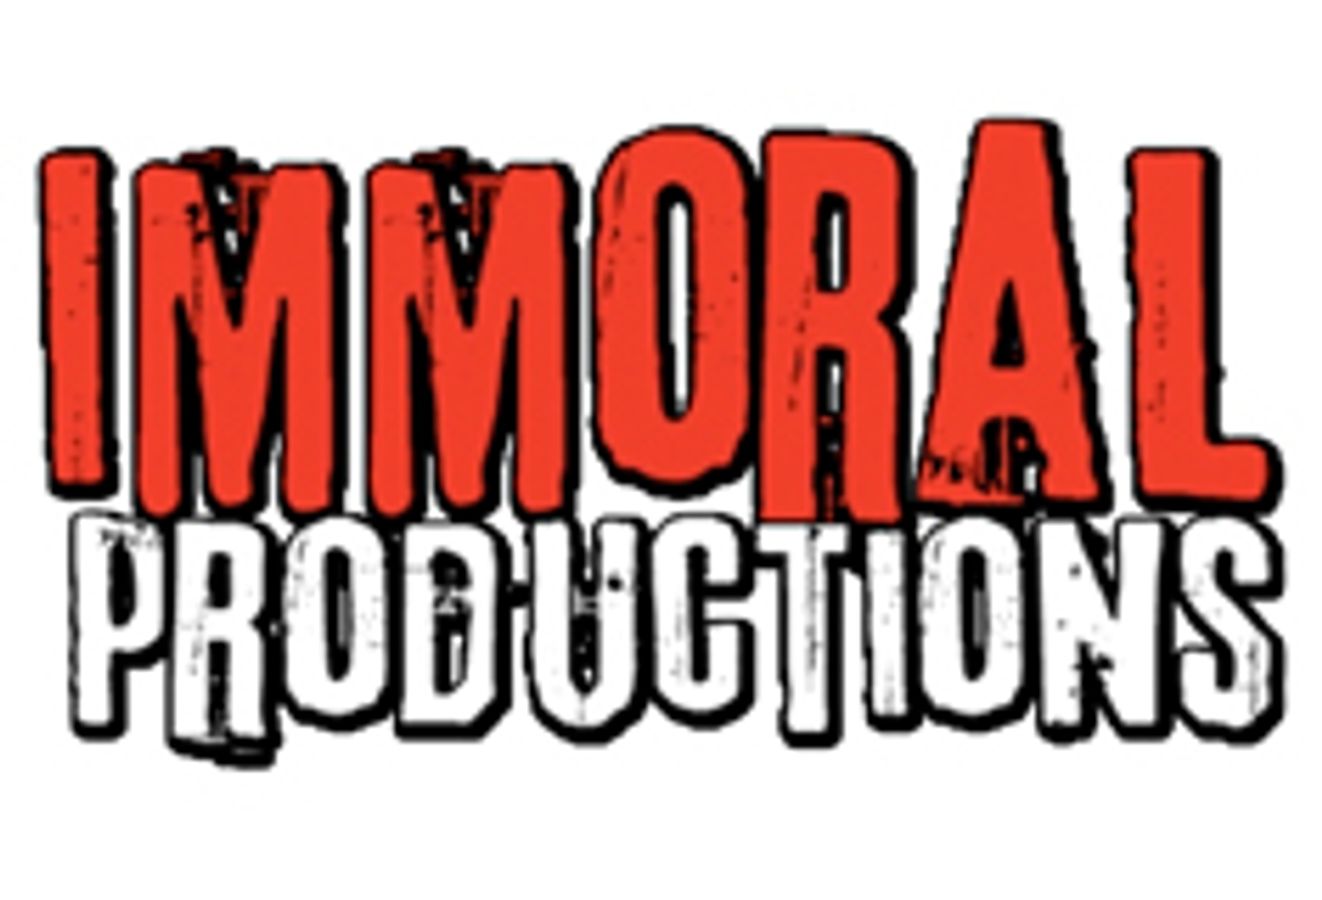 Immoral Productions